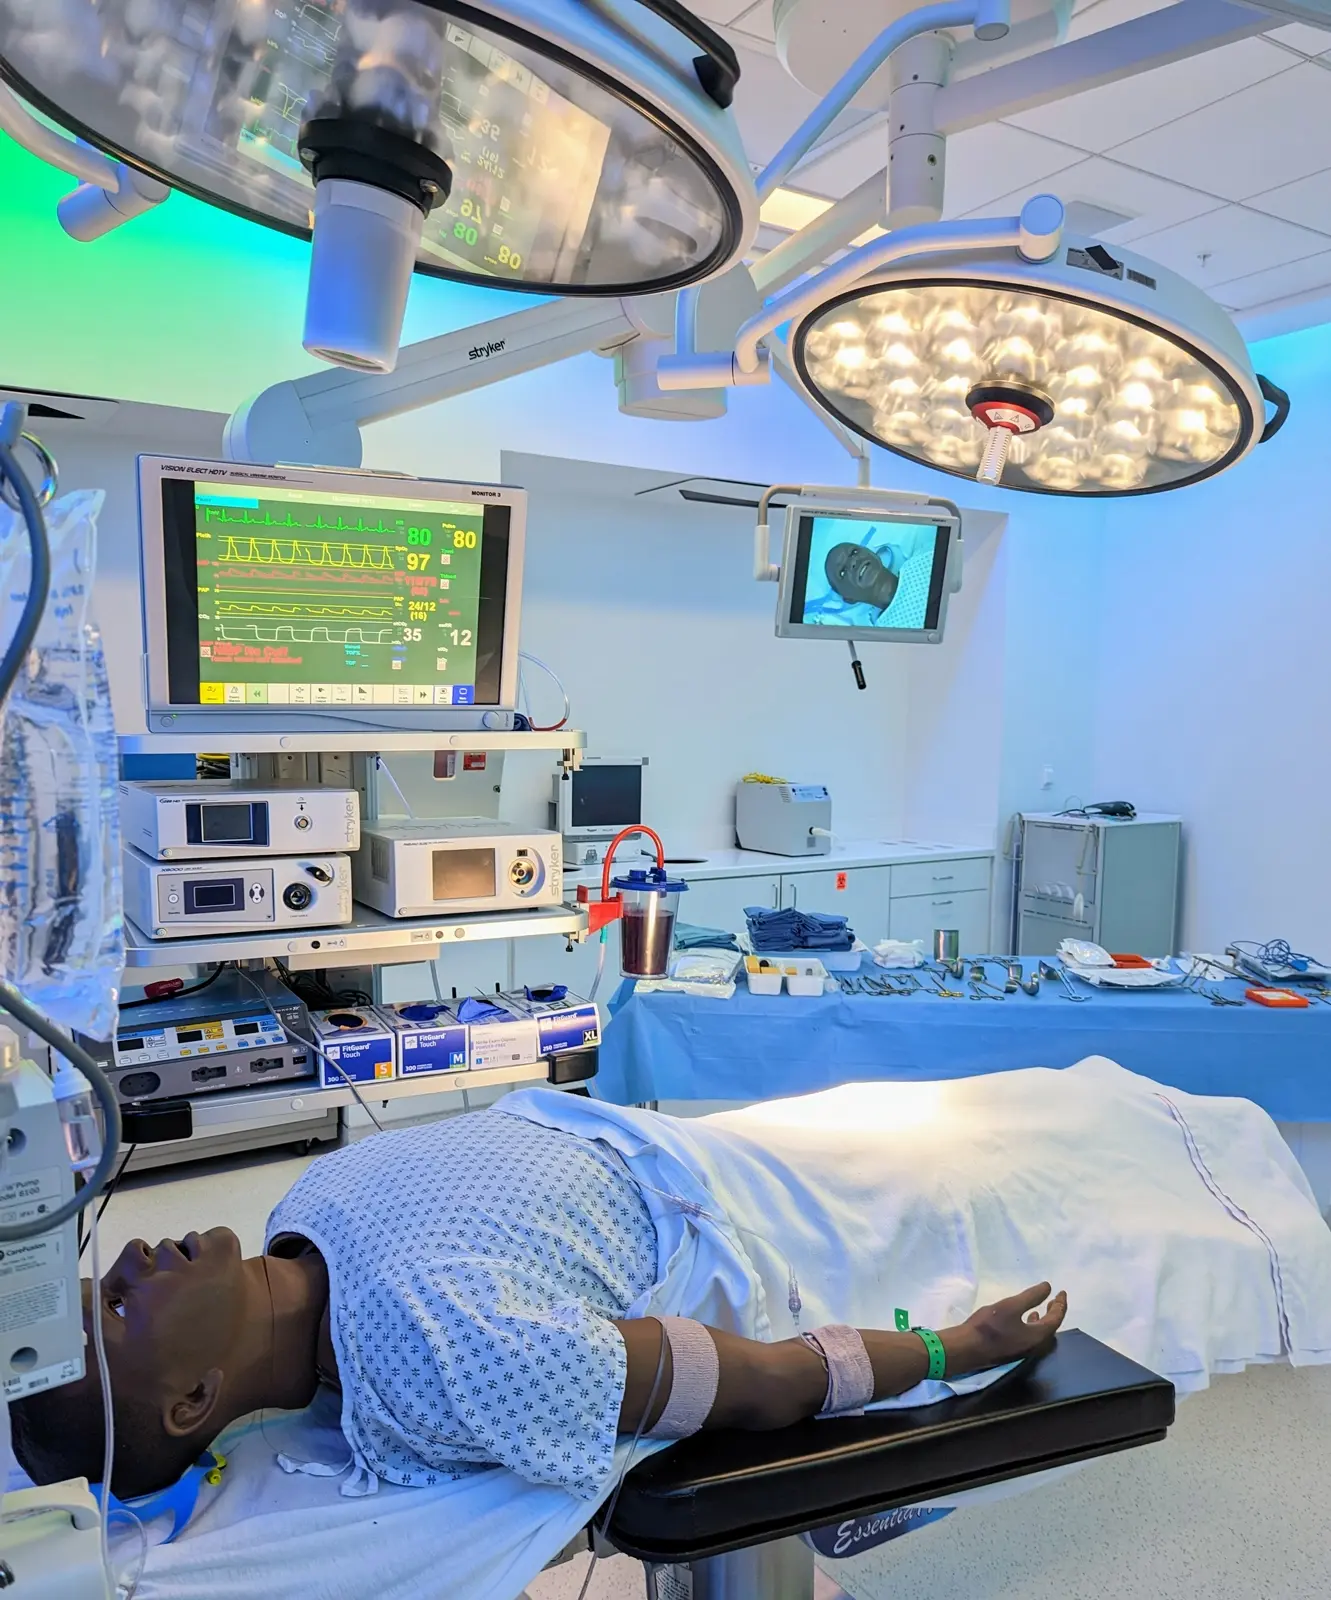 CAMLS A medical dummy lies on an operating table in a brightly lit operating room. Surrounding the dummy are various medical equipment and monitors displaying vital signs. Overhead surgical lights illuminate the scene, and a tray of surgical instruments is nearby.